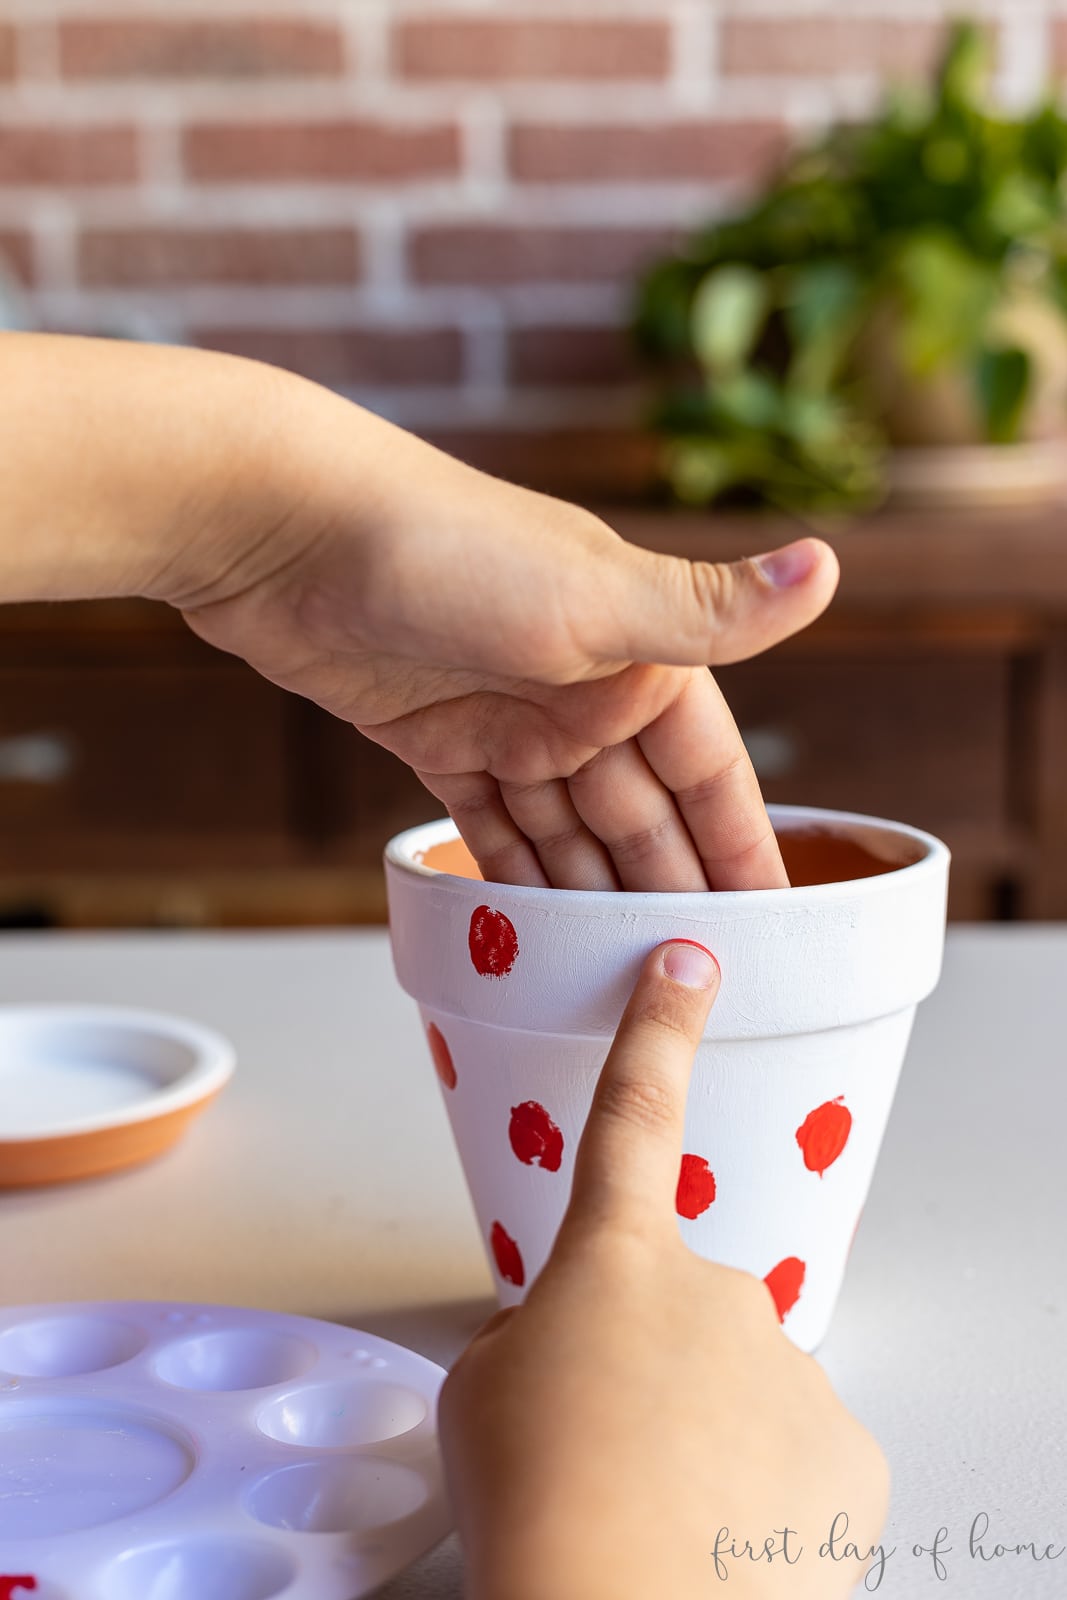 Child using fingerprint to paint flower pot with red dots to make ladybug design